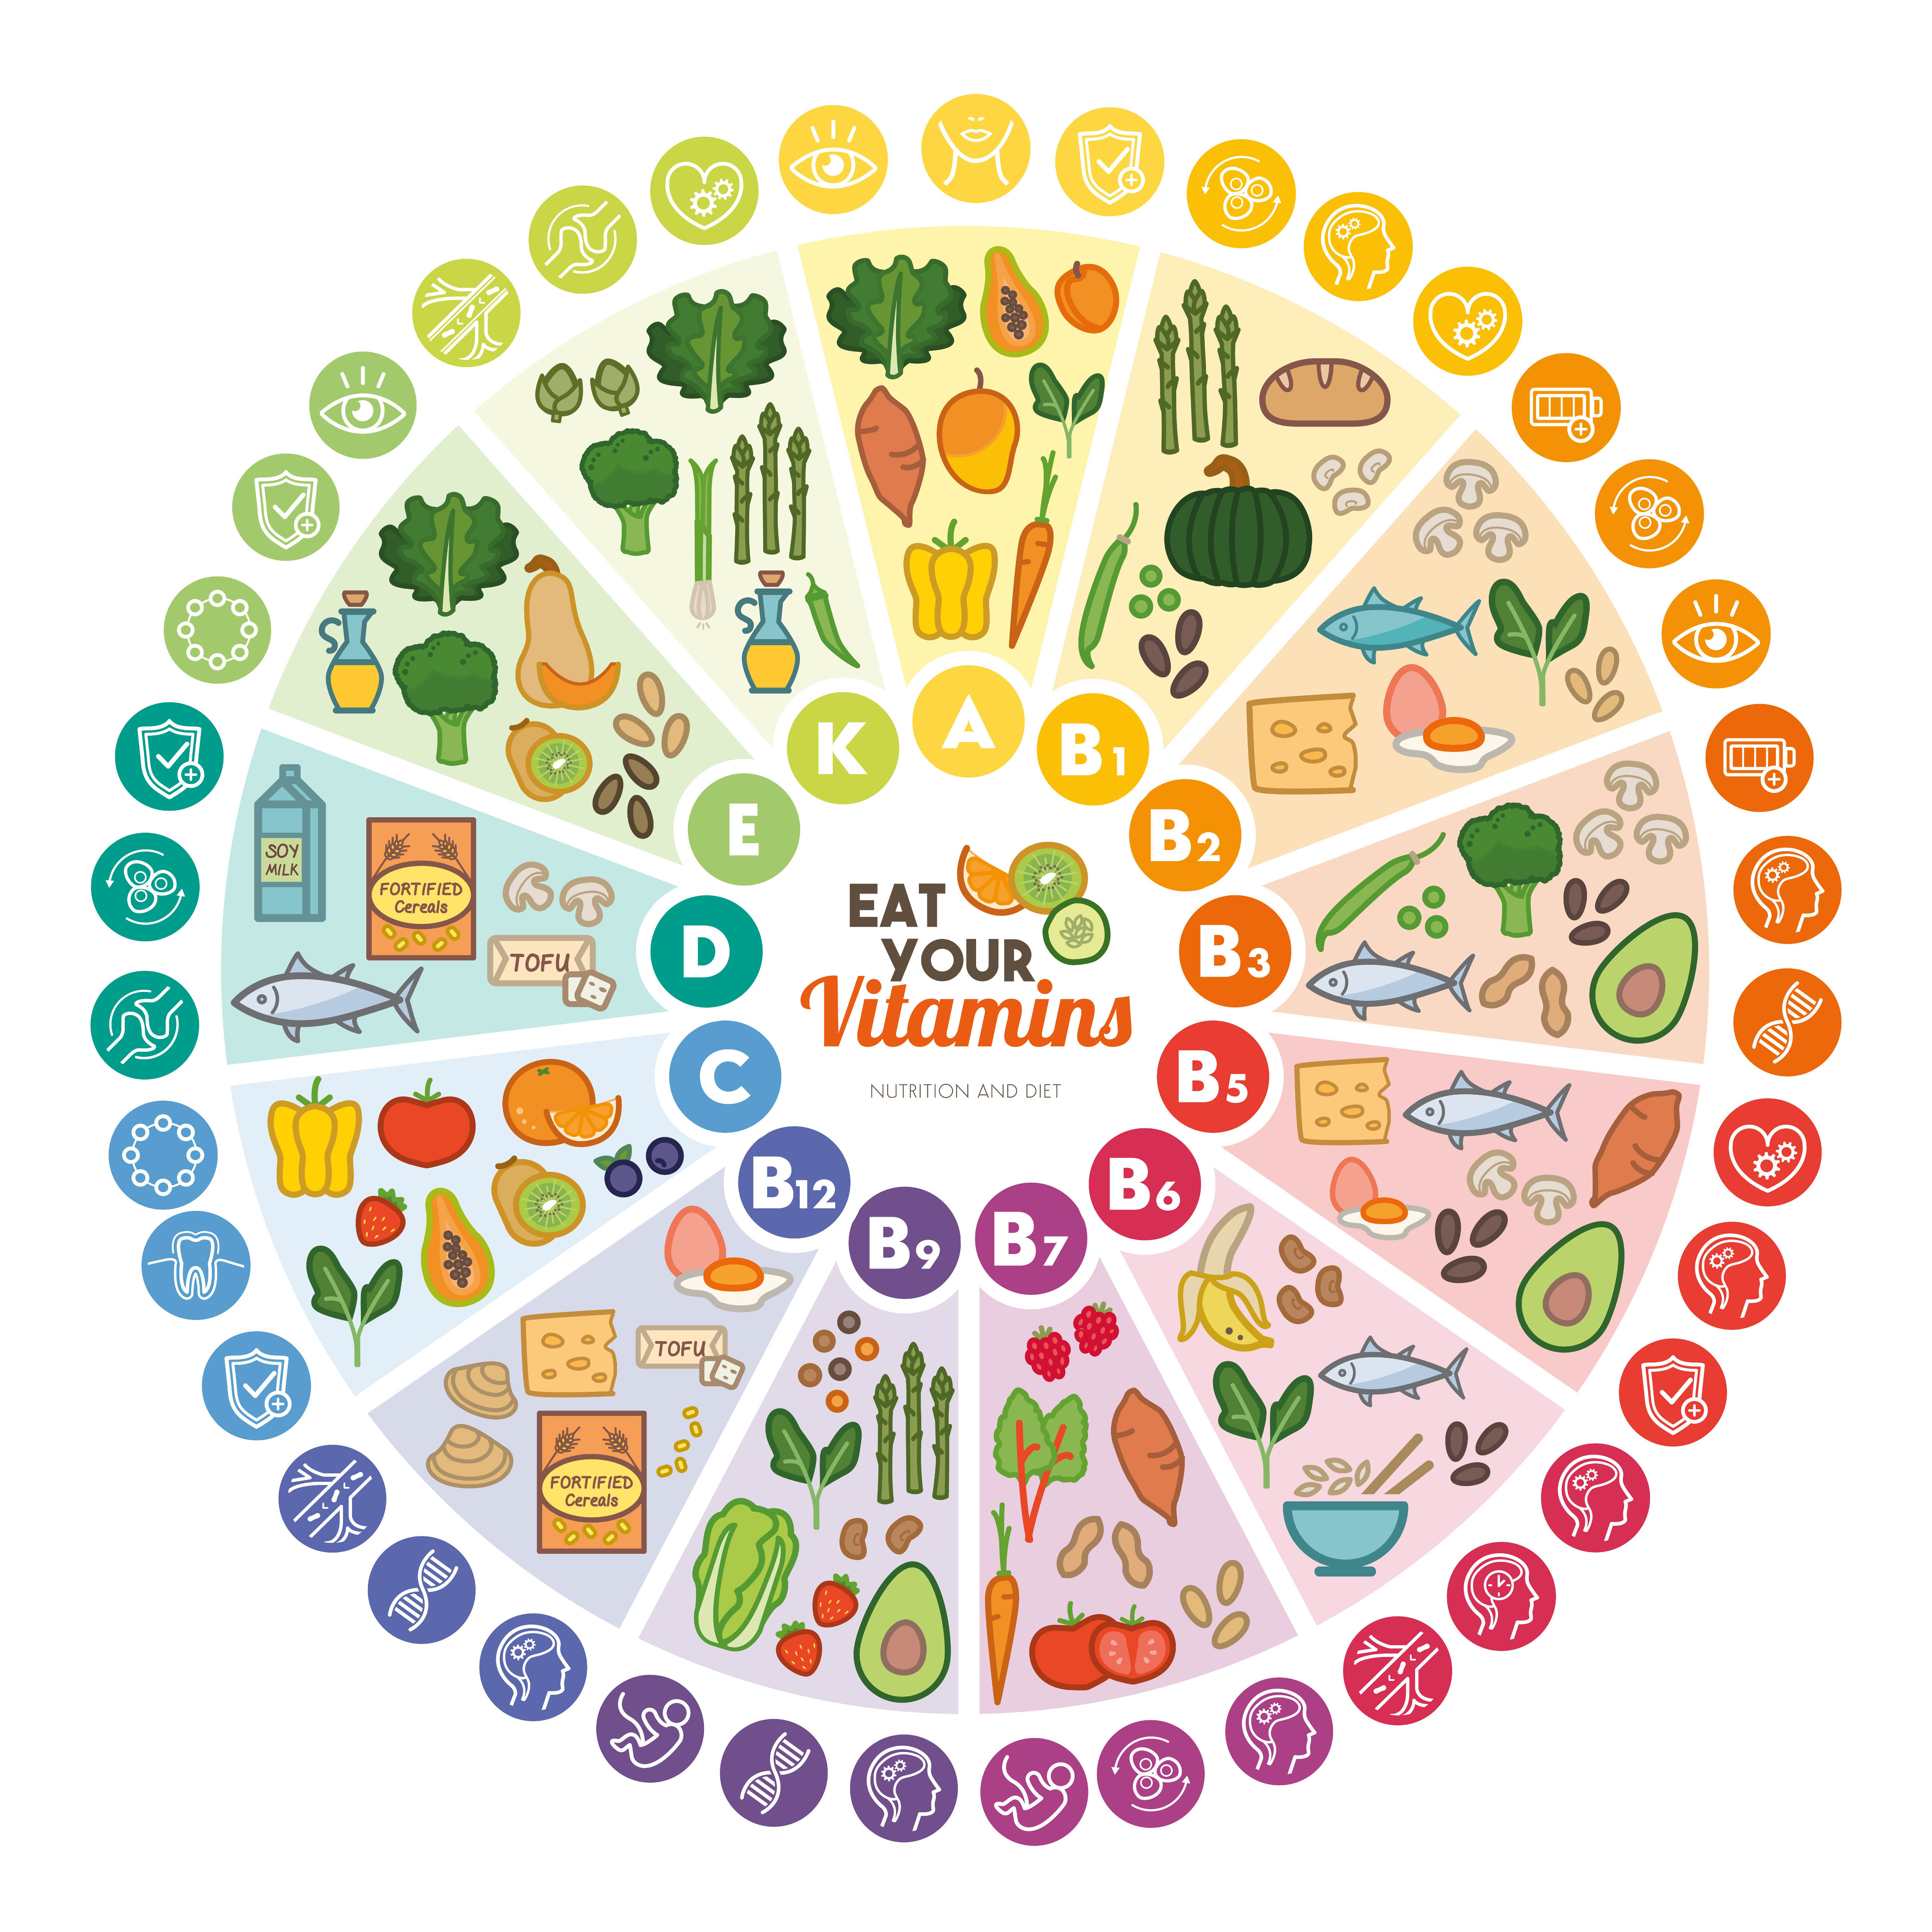 If you don't want to supplement vitamins and minerals preparations, take strict care over your diet. You can use this infographic to find out where to look for conrete vitamins!